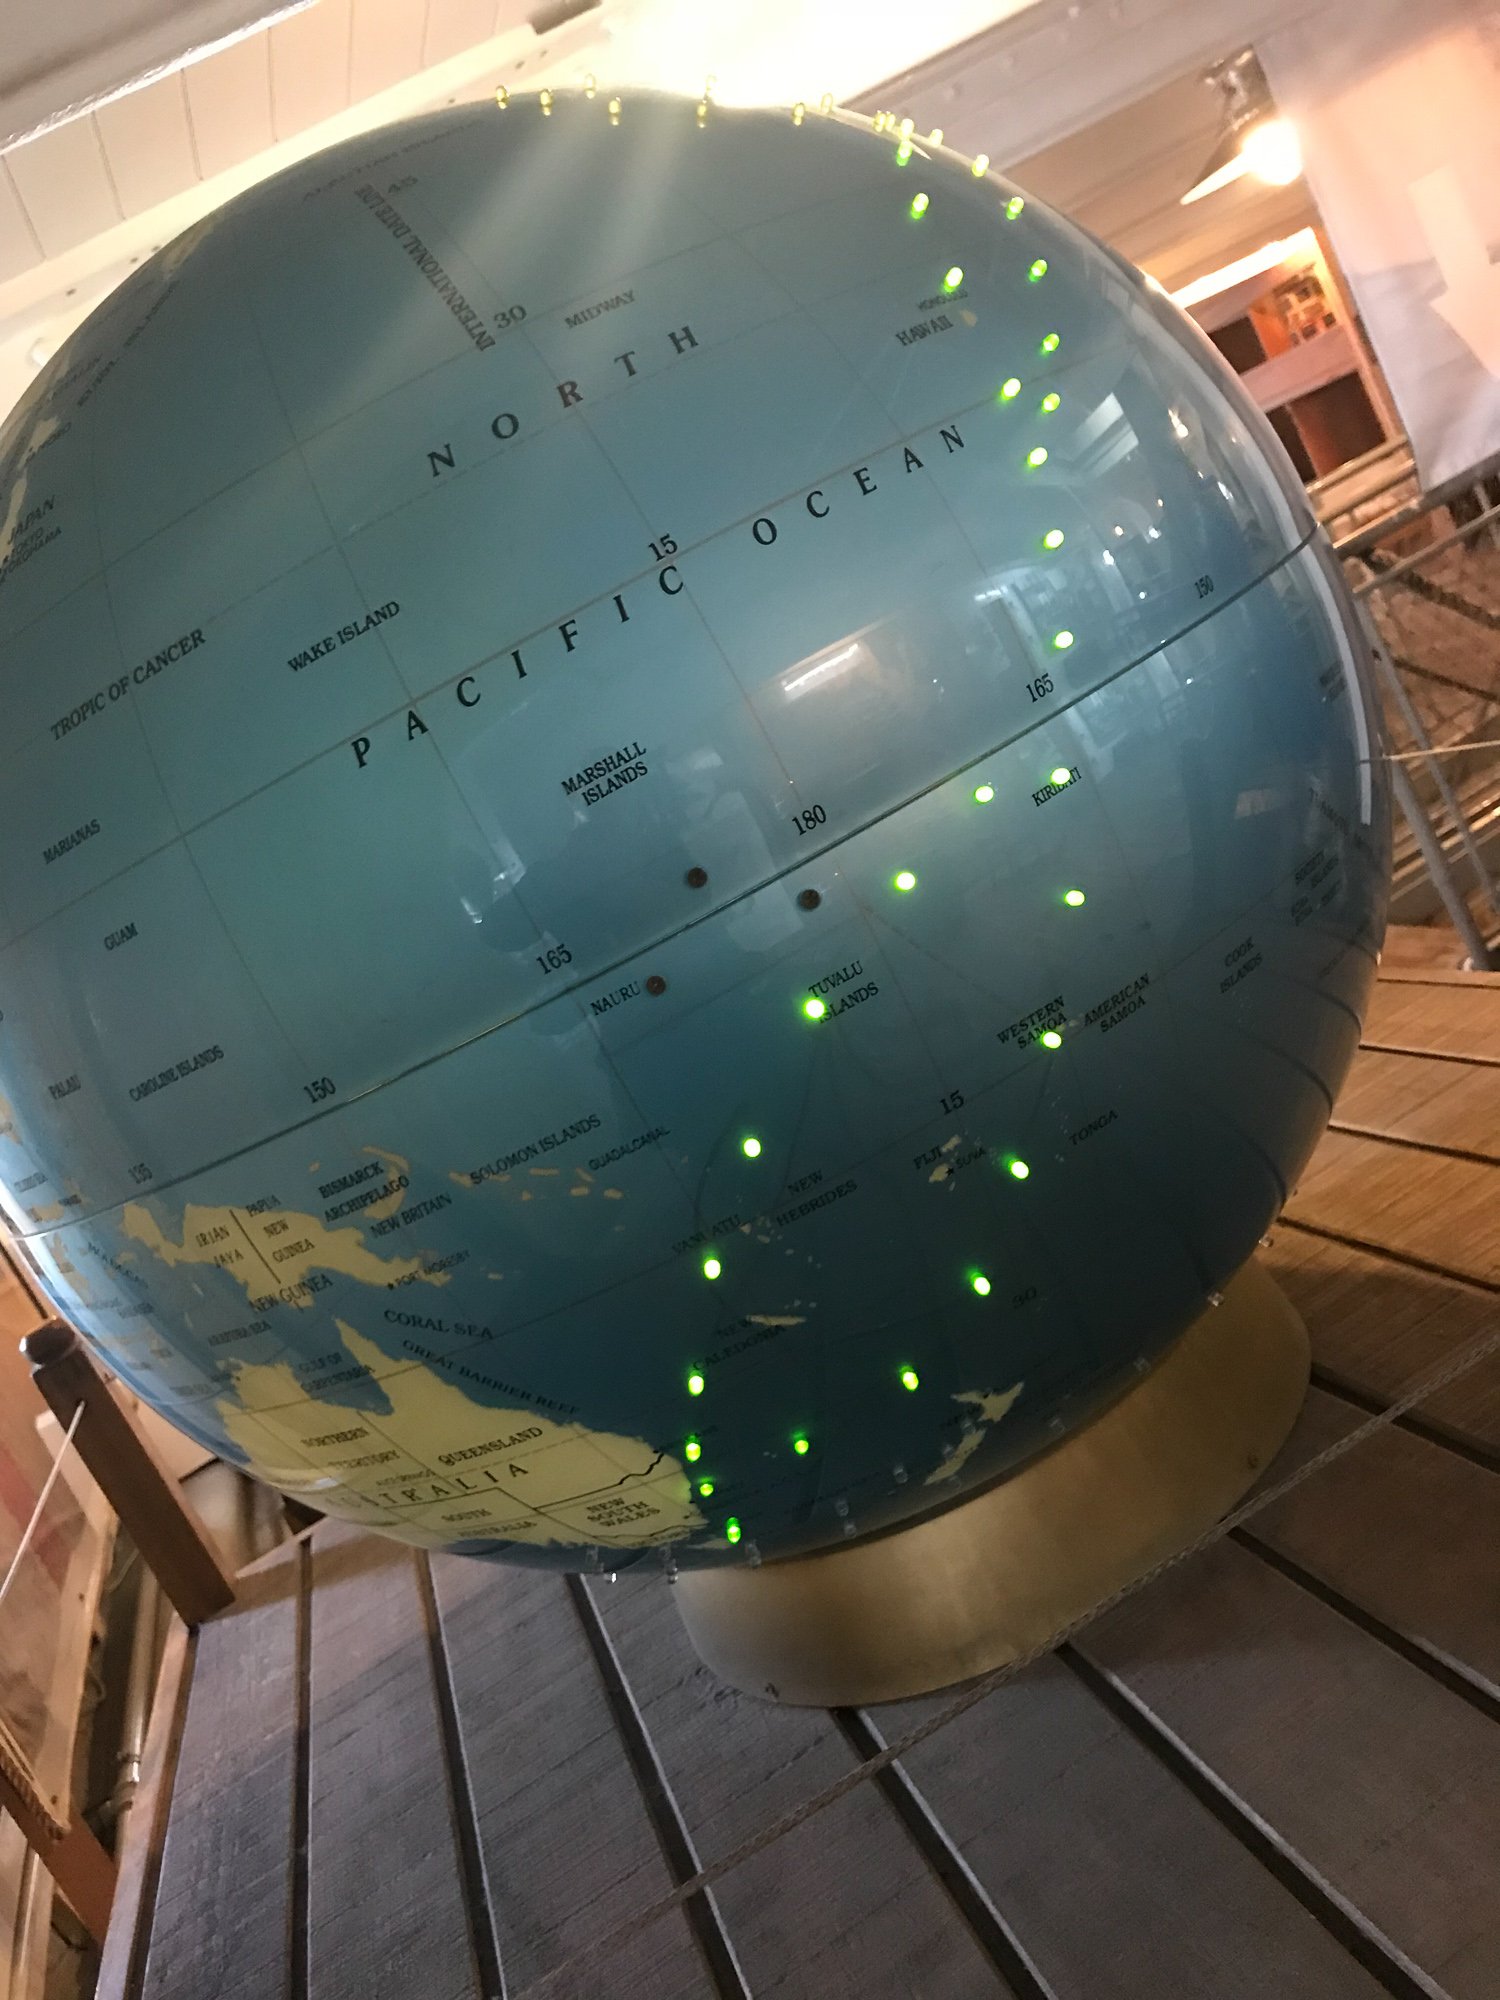 This globe shows major global shipping routes.